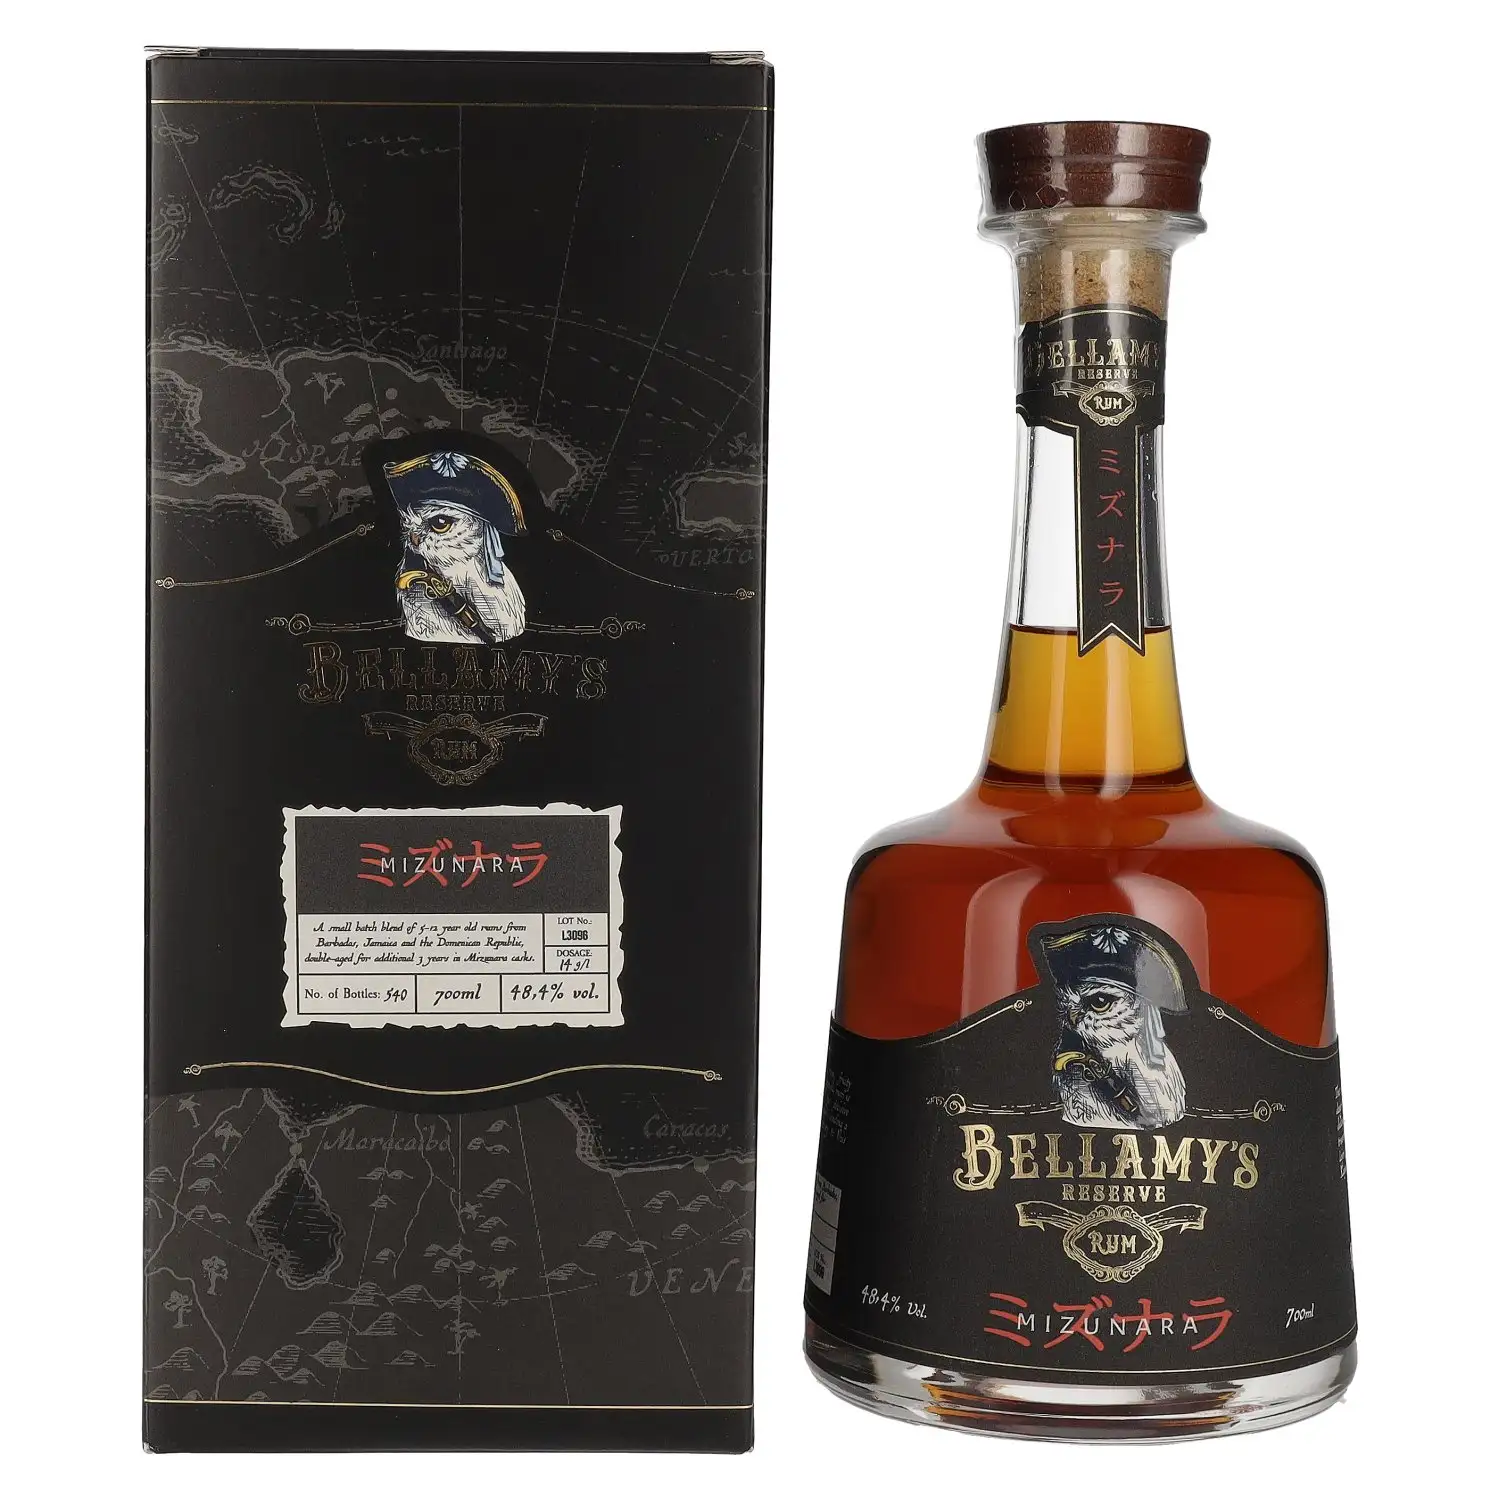 Image of the front of the bottle of the rum Bellamy‘s Reserve Mizunara